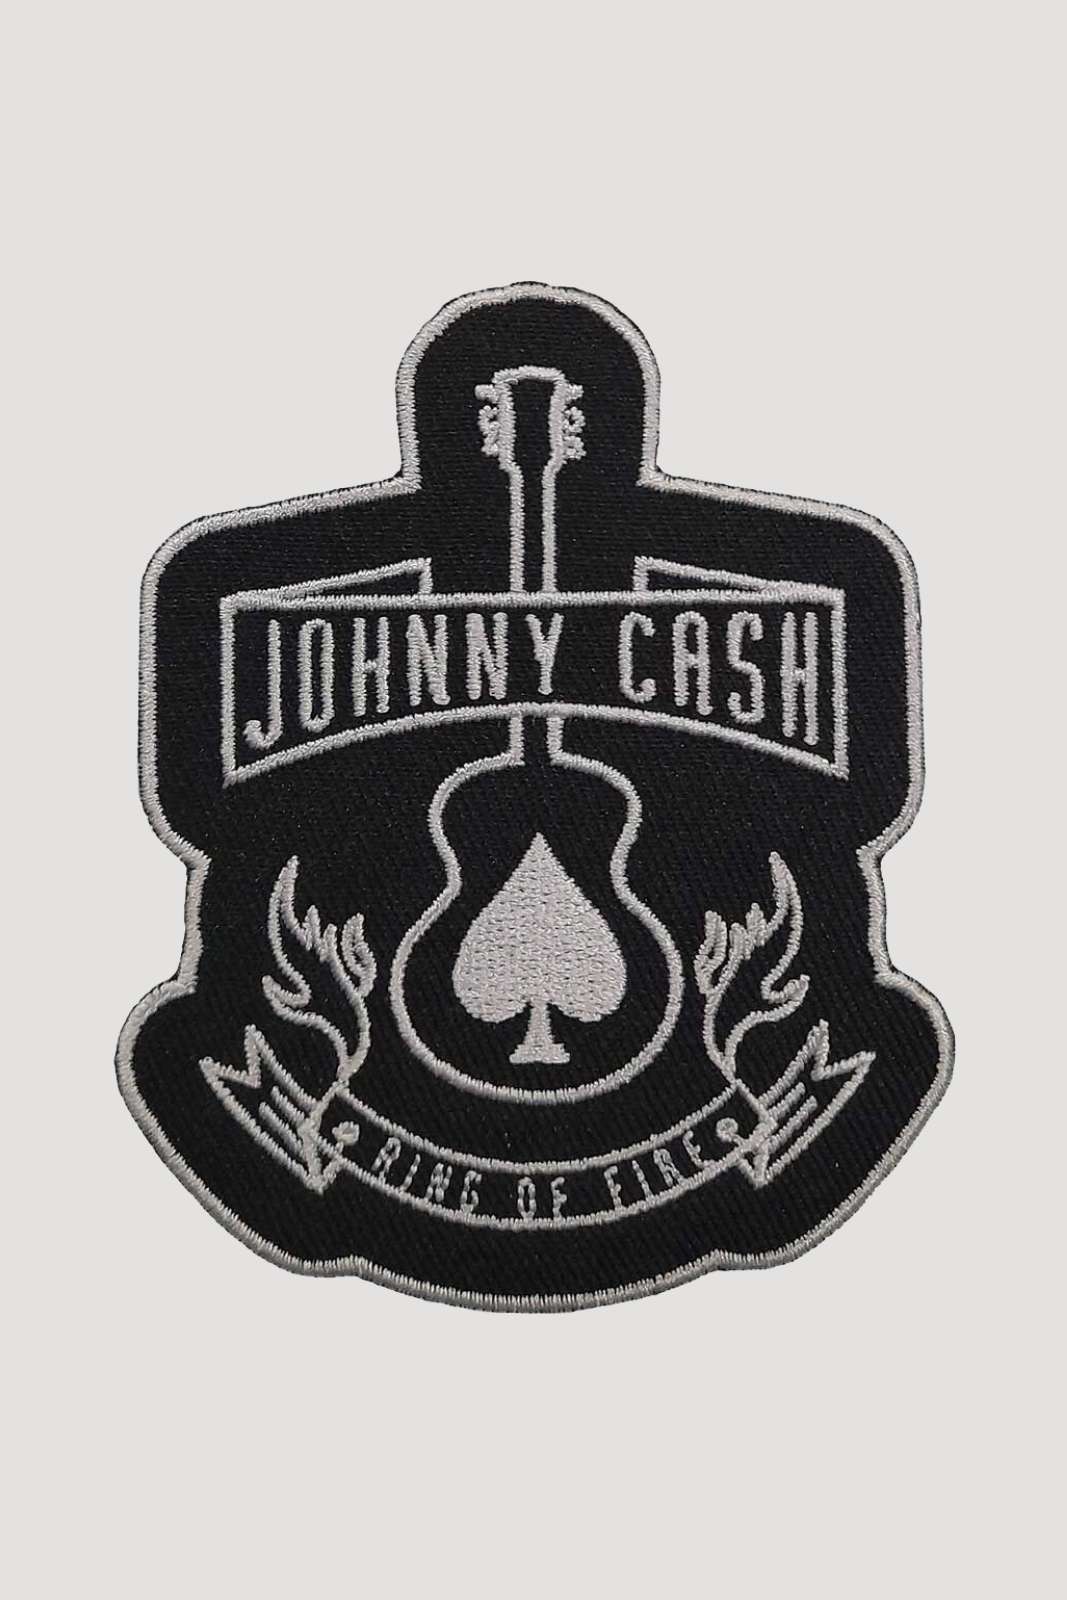 Johnny Cash Ring Of Fire Patch